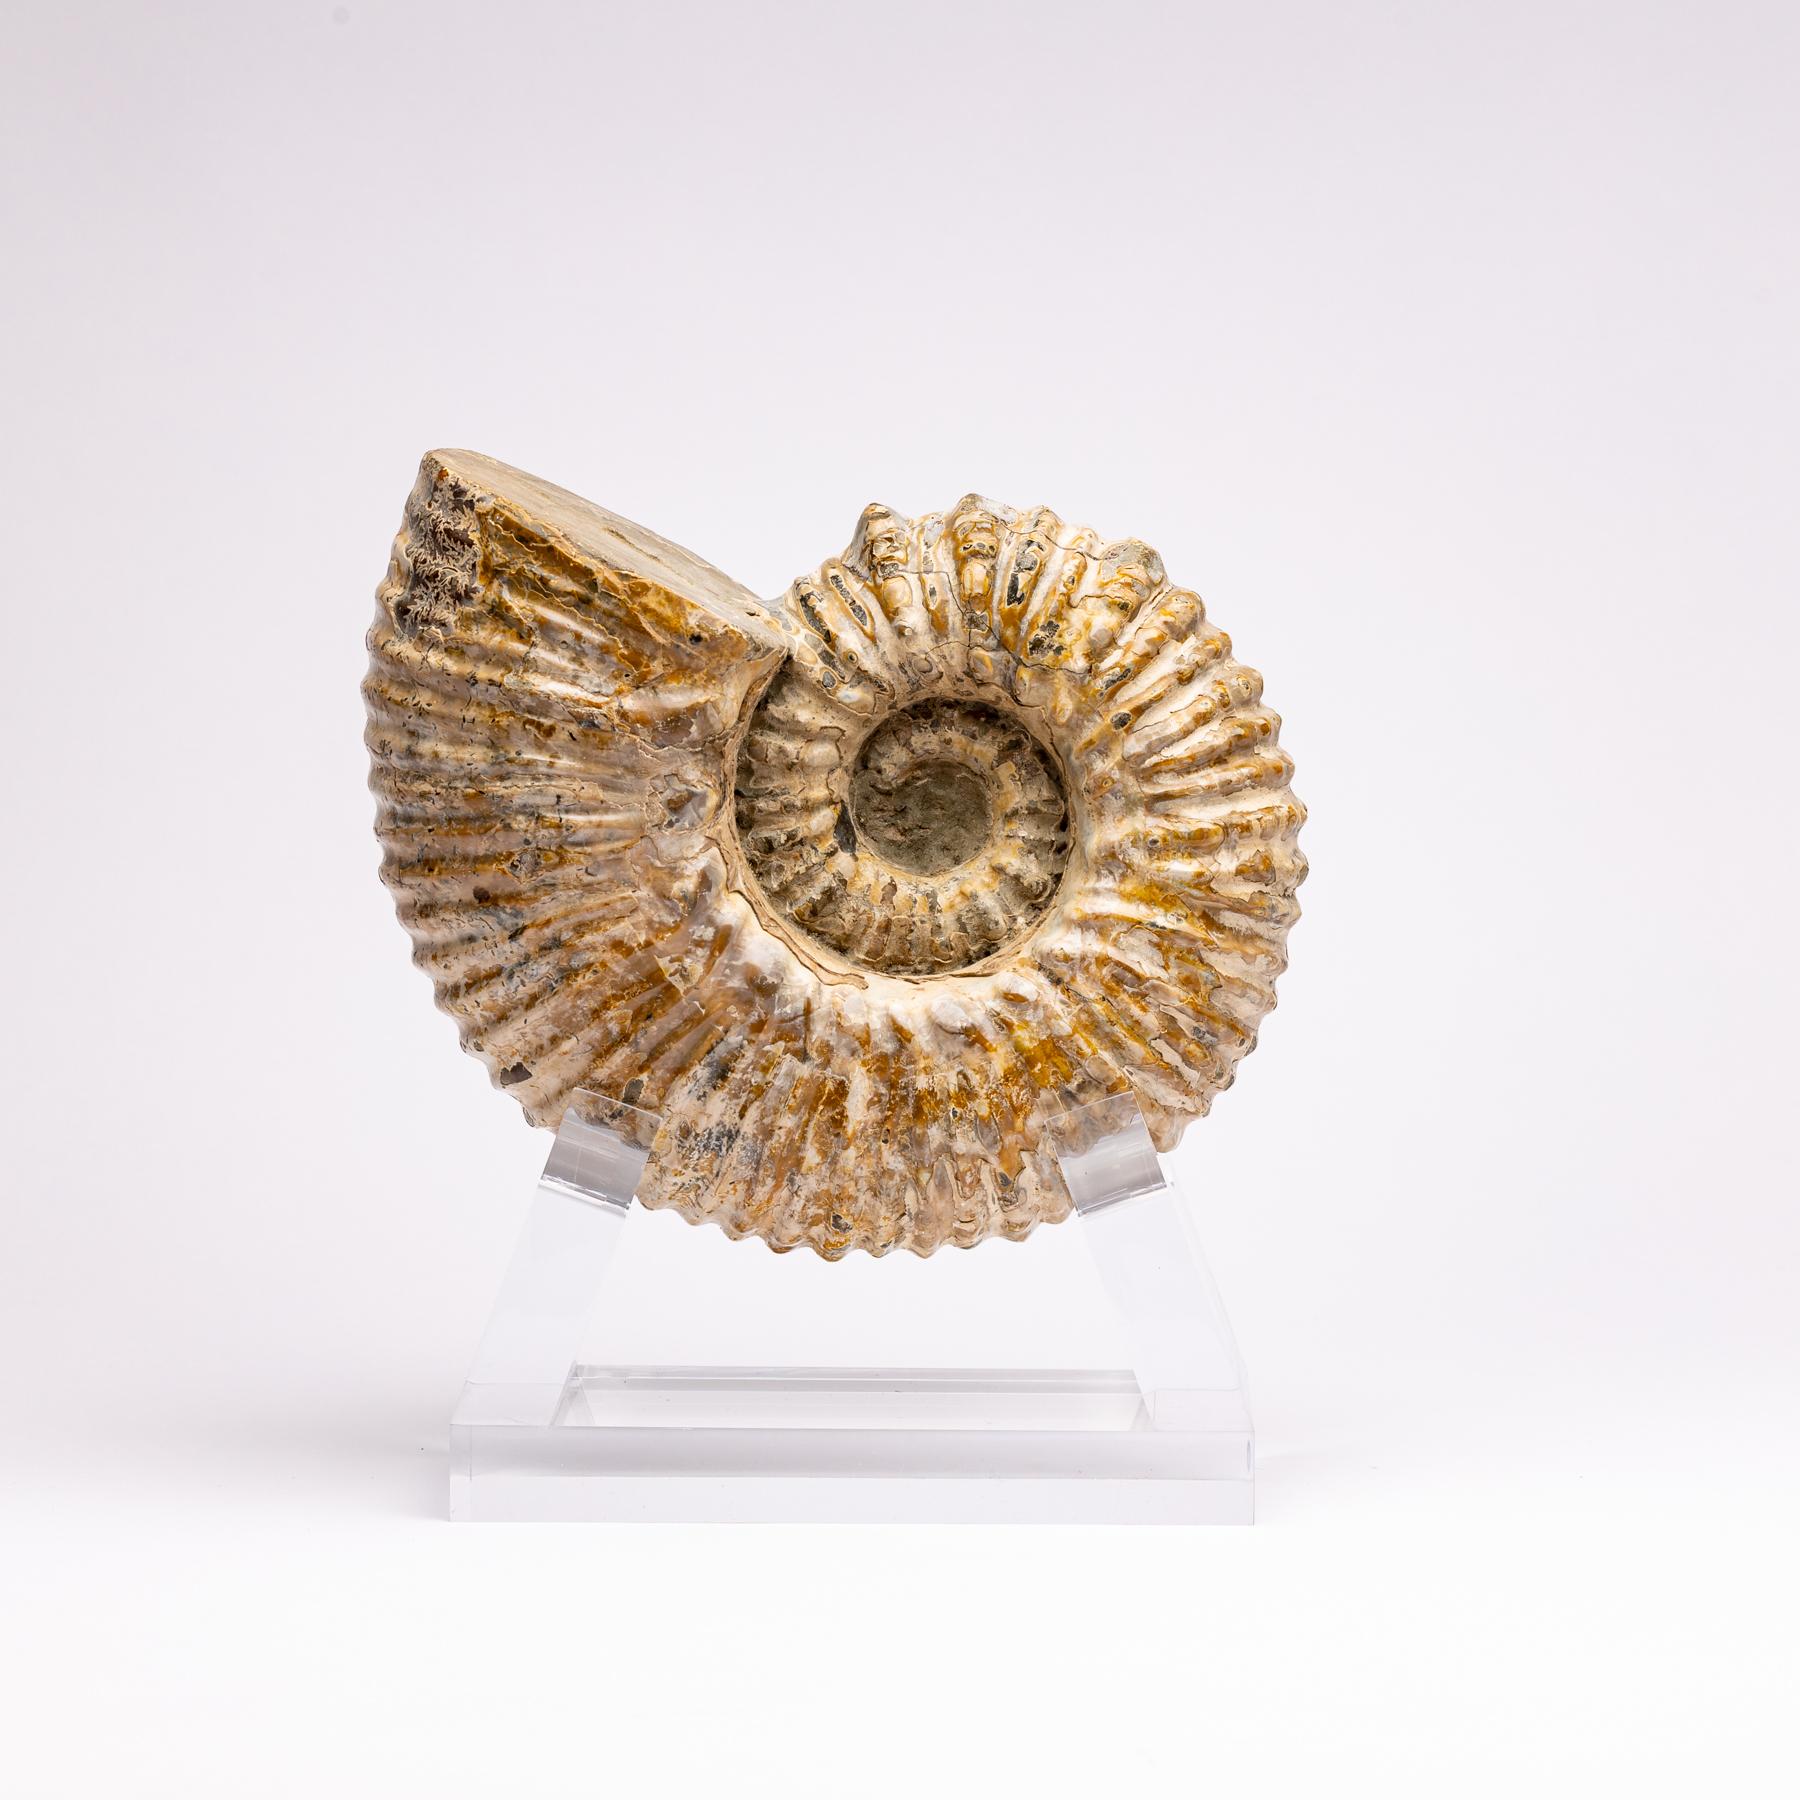 Douvilleiceras Ammonite
Period: Cretaceous 65 - 144 Million years old
Ammonites were squid-like predatory creatures that lived inside spiral-shaped shells. The ammonite shell was constantly developing as they grew, but they only lived in the outer